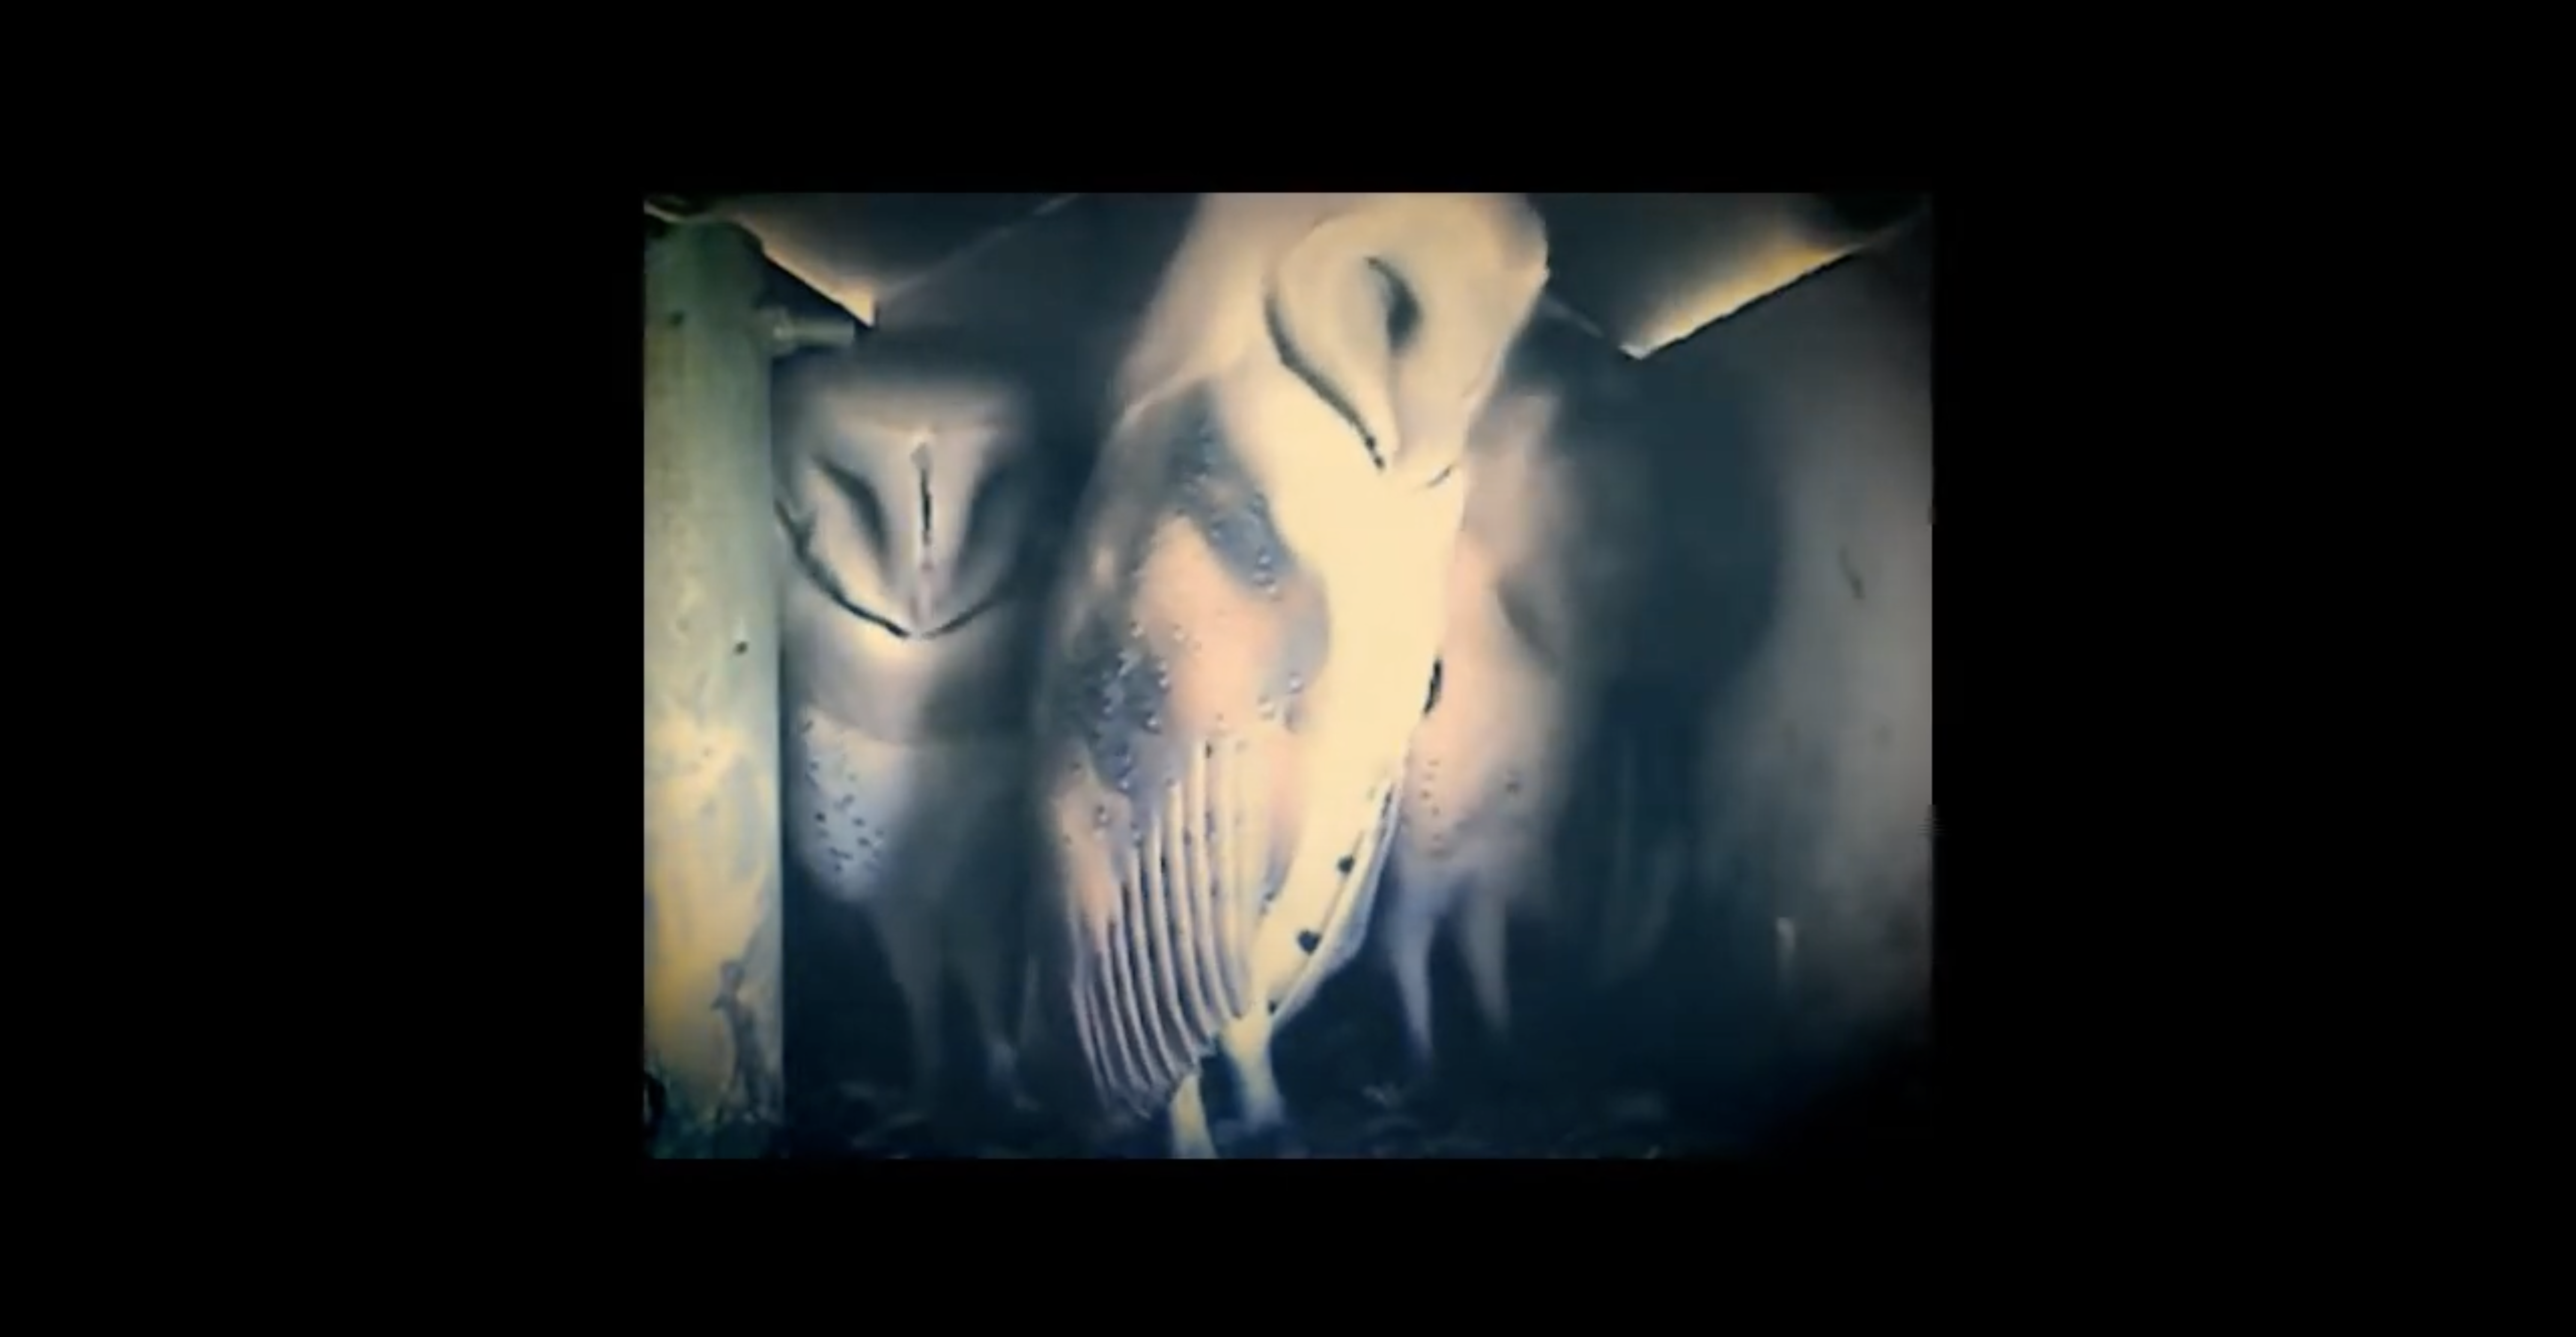 An artistic still from a music video with owls.